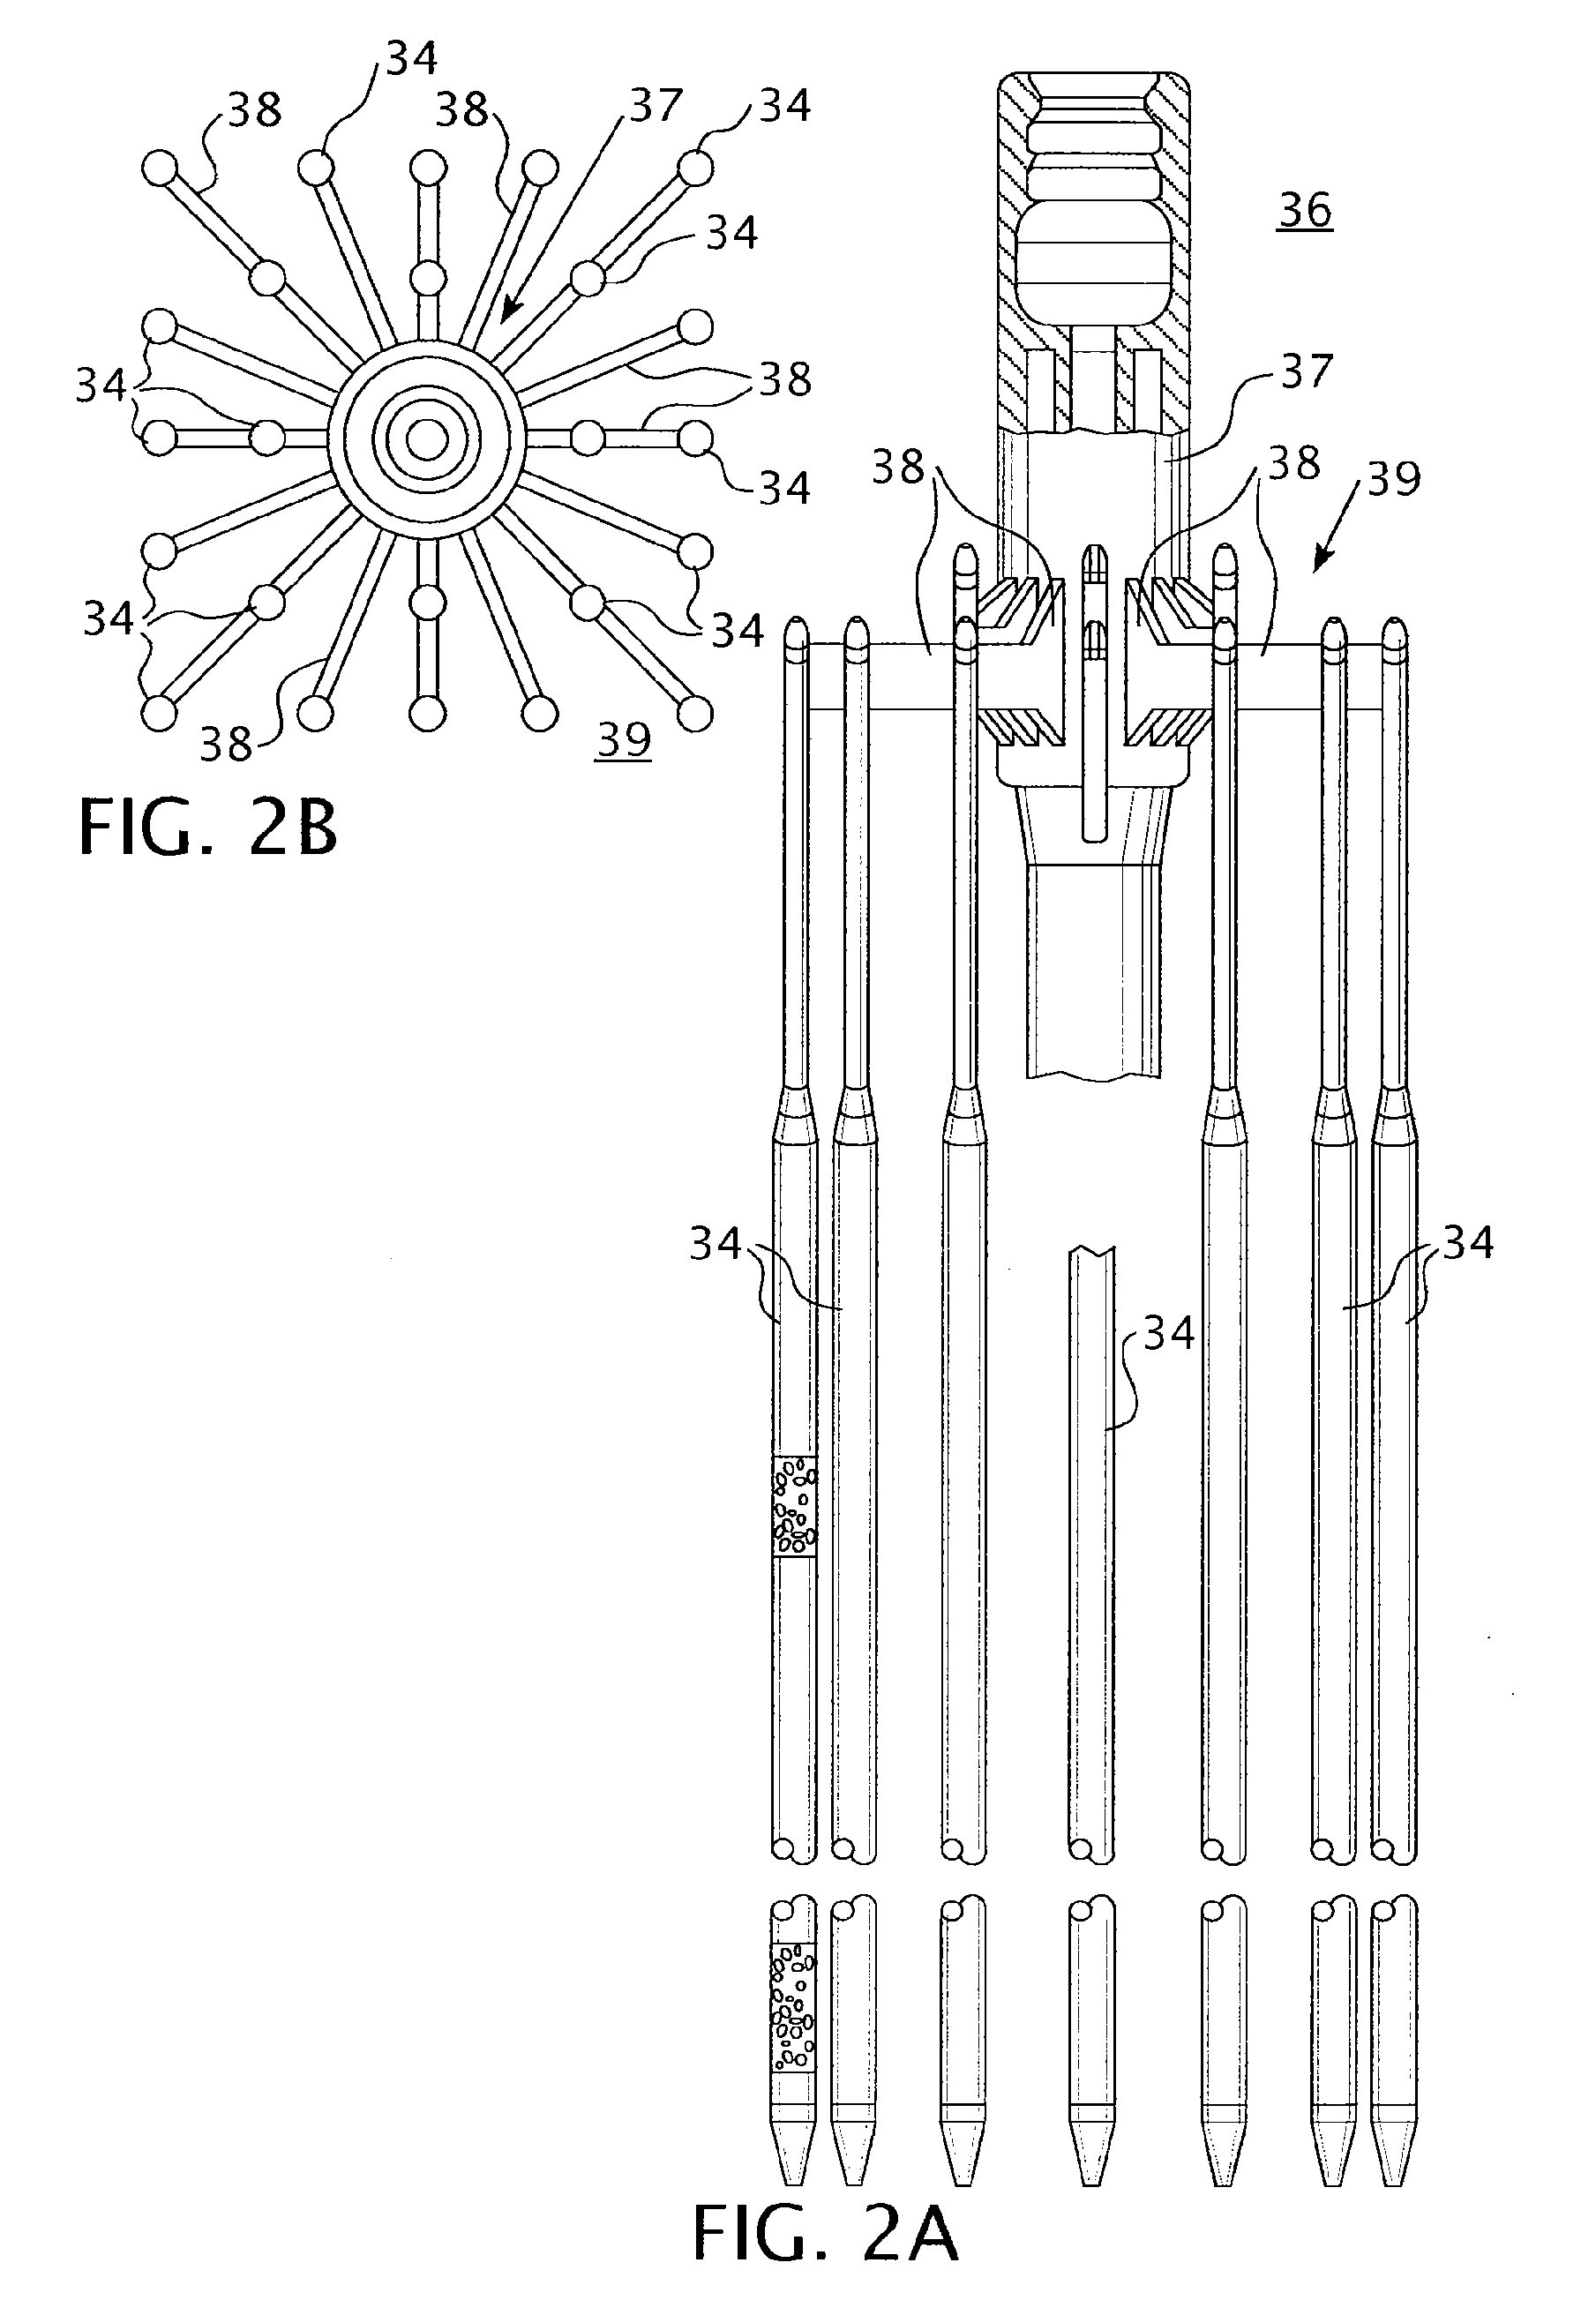 Nuclear reactor robust gray control rod